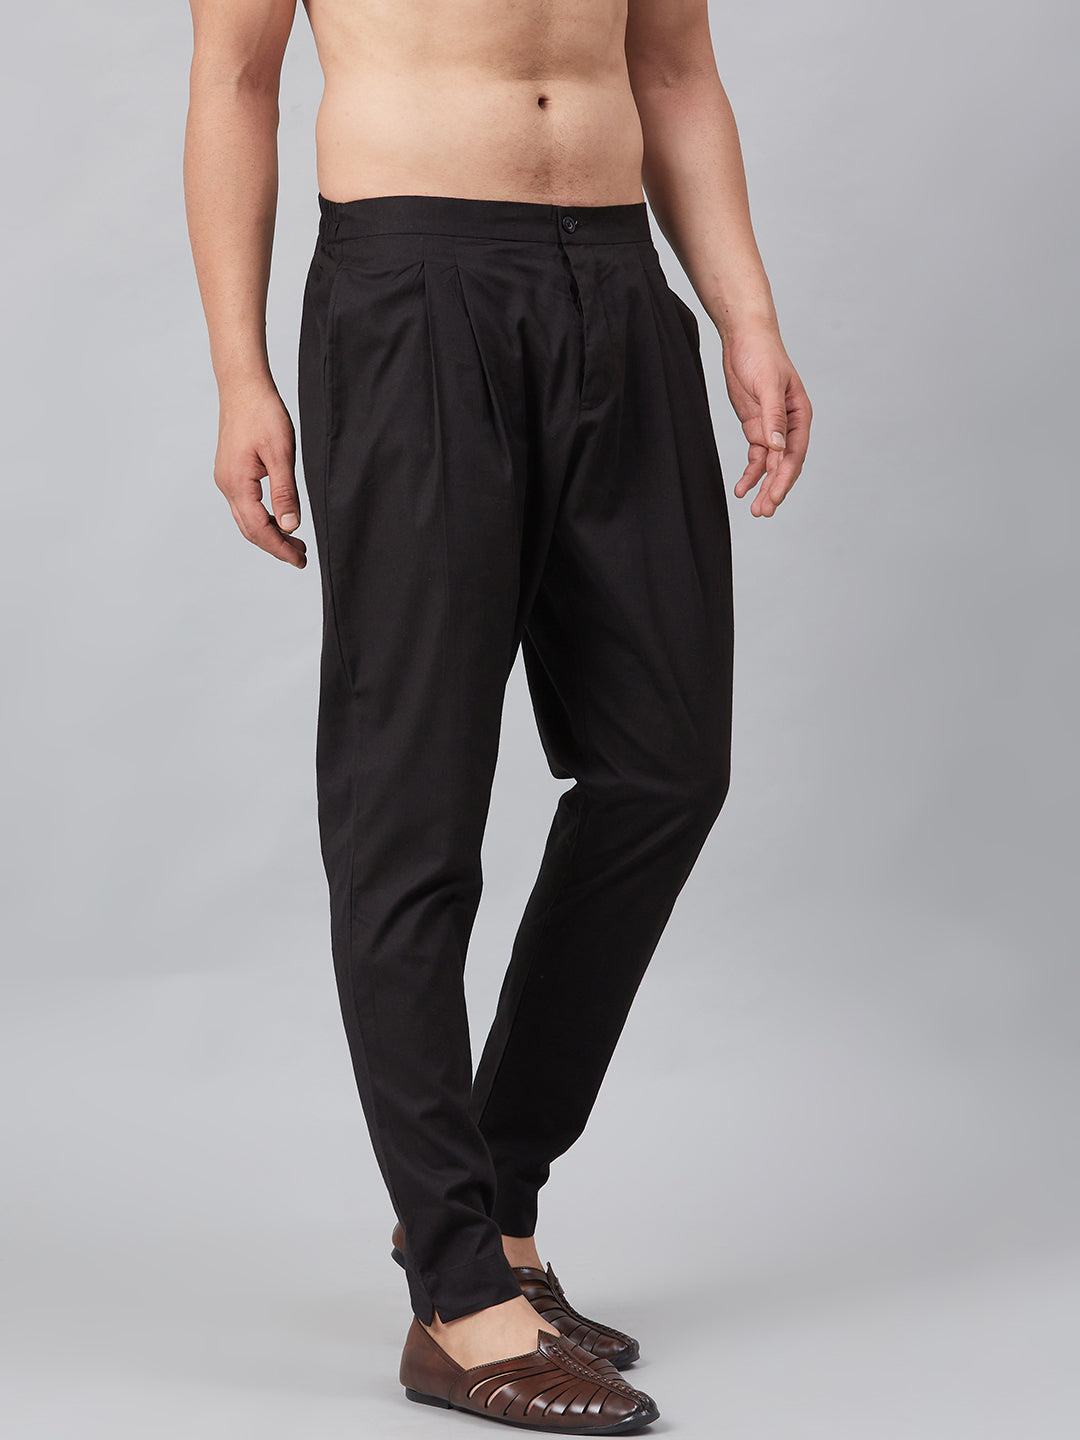 Combo Pack of 2: Black Solid Cotton Pyjama and Cotton Trouser